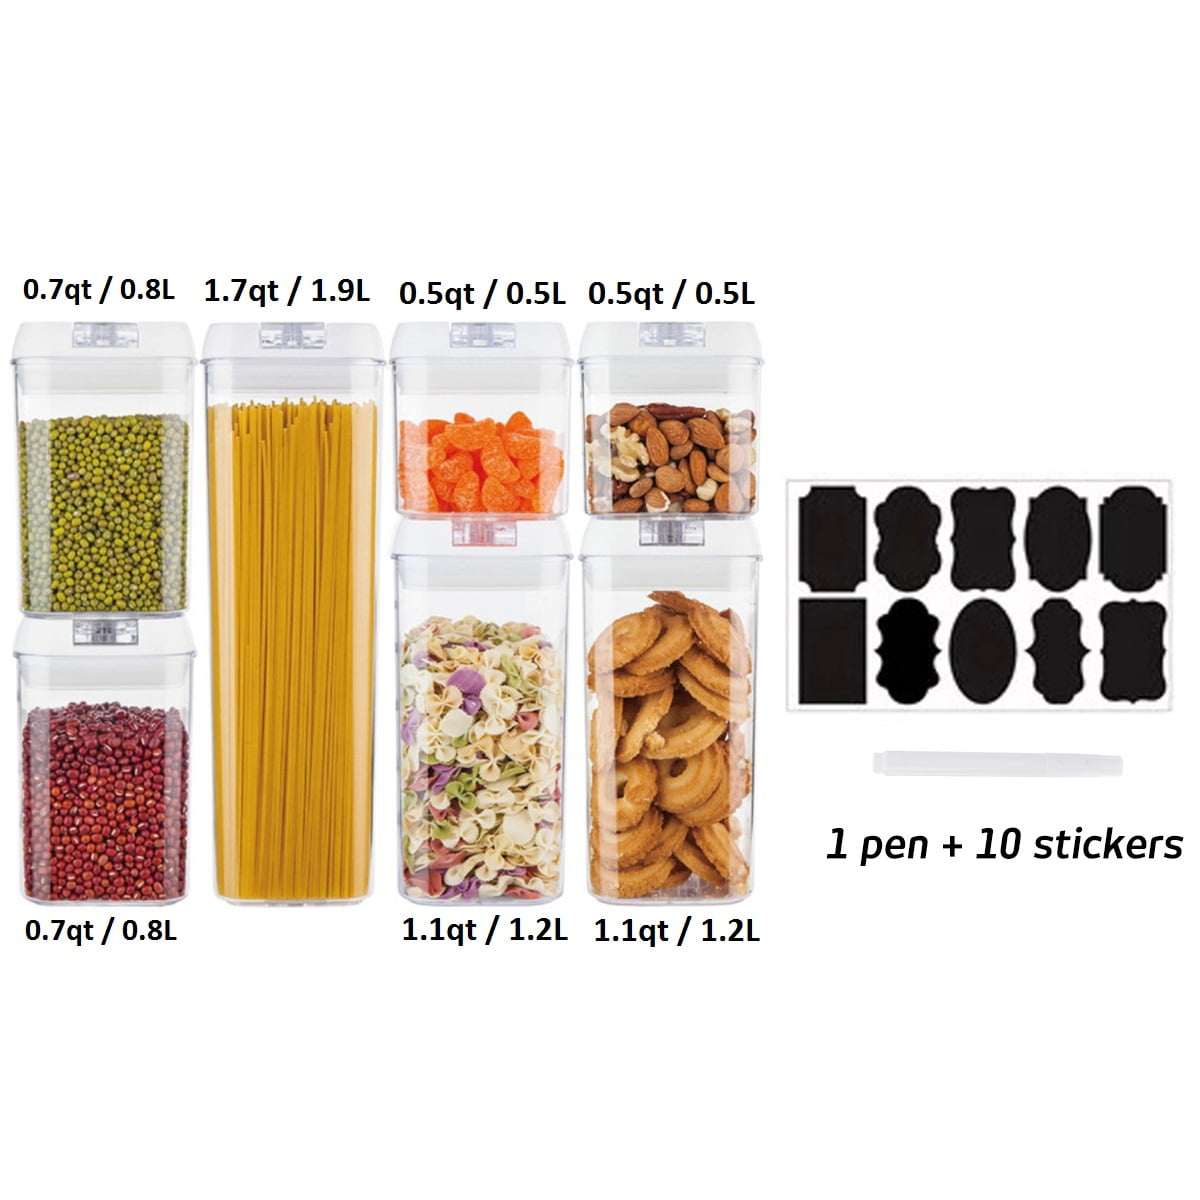 76 Piece BPA Free Food Storage Containers With Lids – Plastic